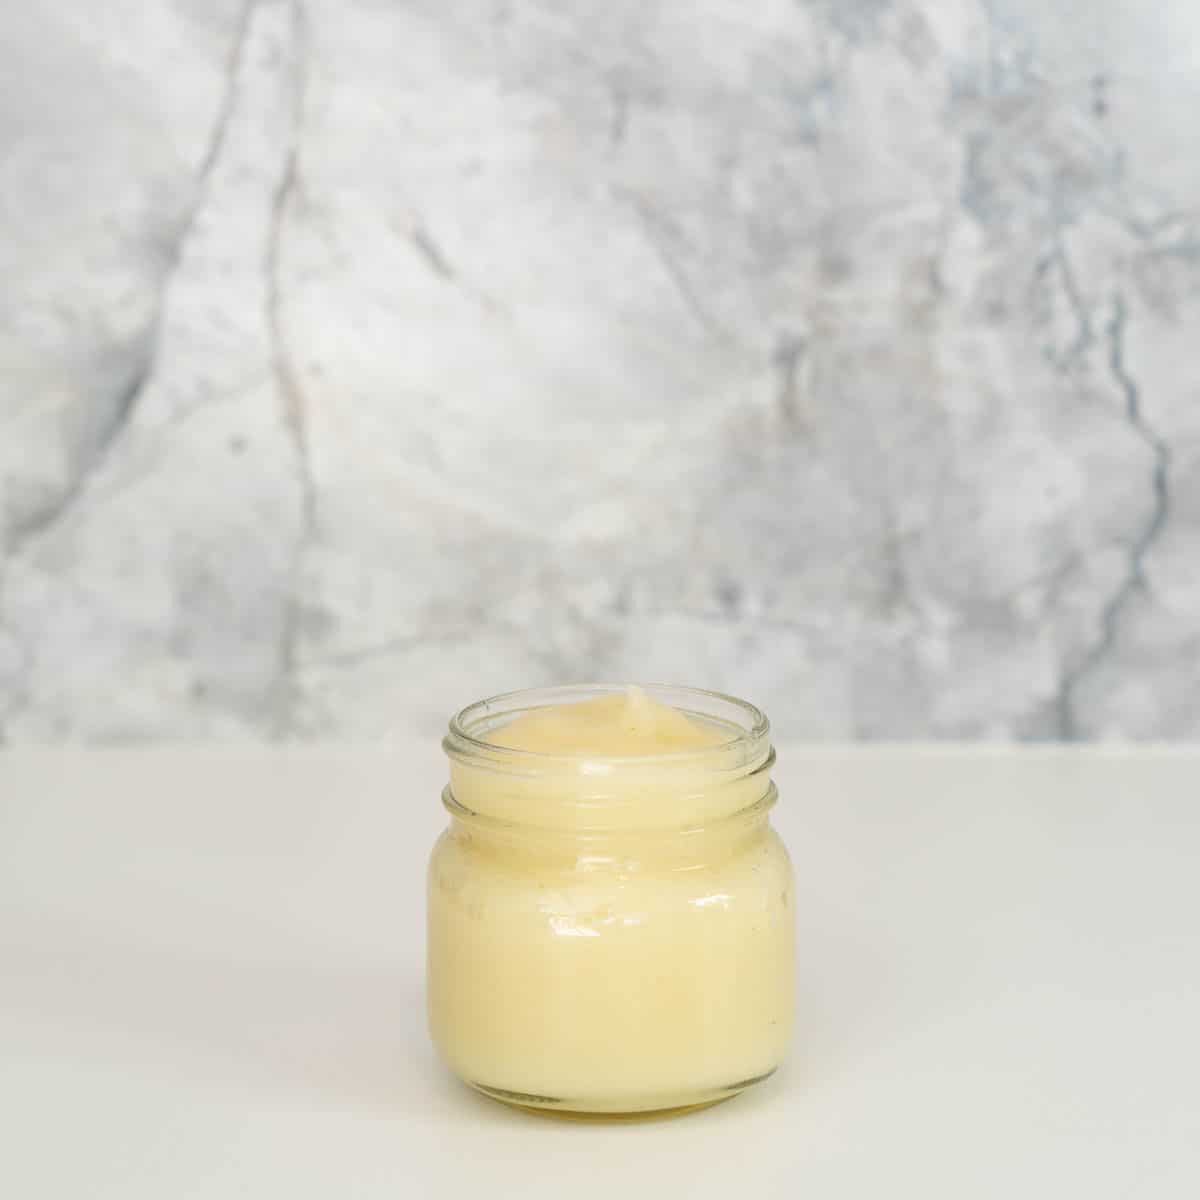 A glass jar of pear puree on a bench.